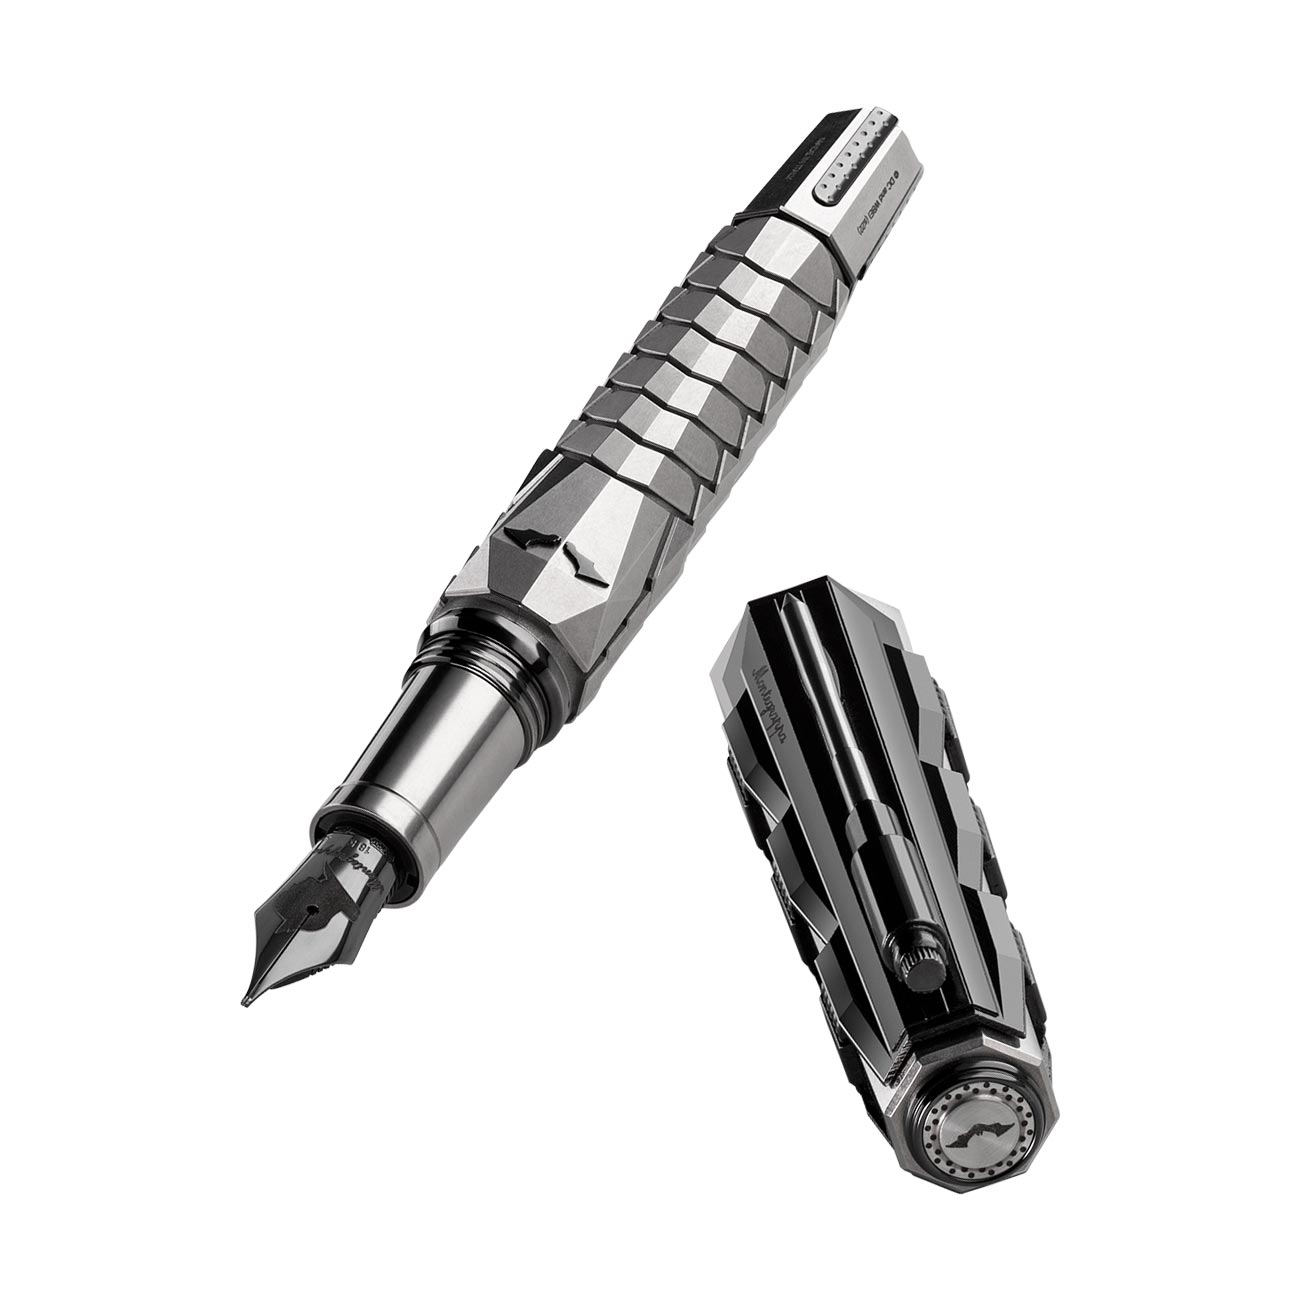 Montegrappa THE BATMAN Limited Edition Fountain Pen – The Nibsmith